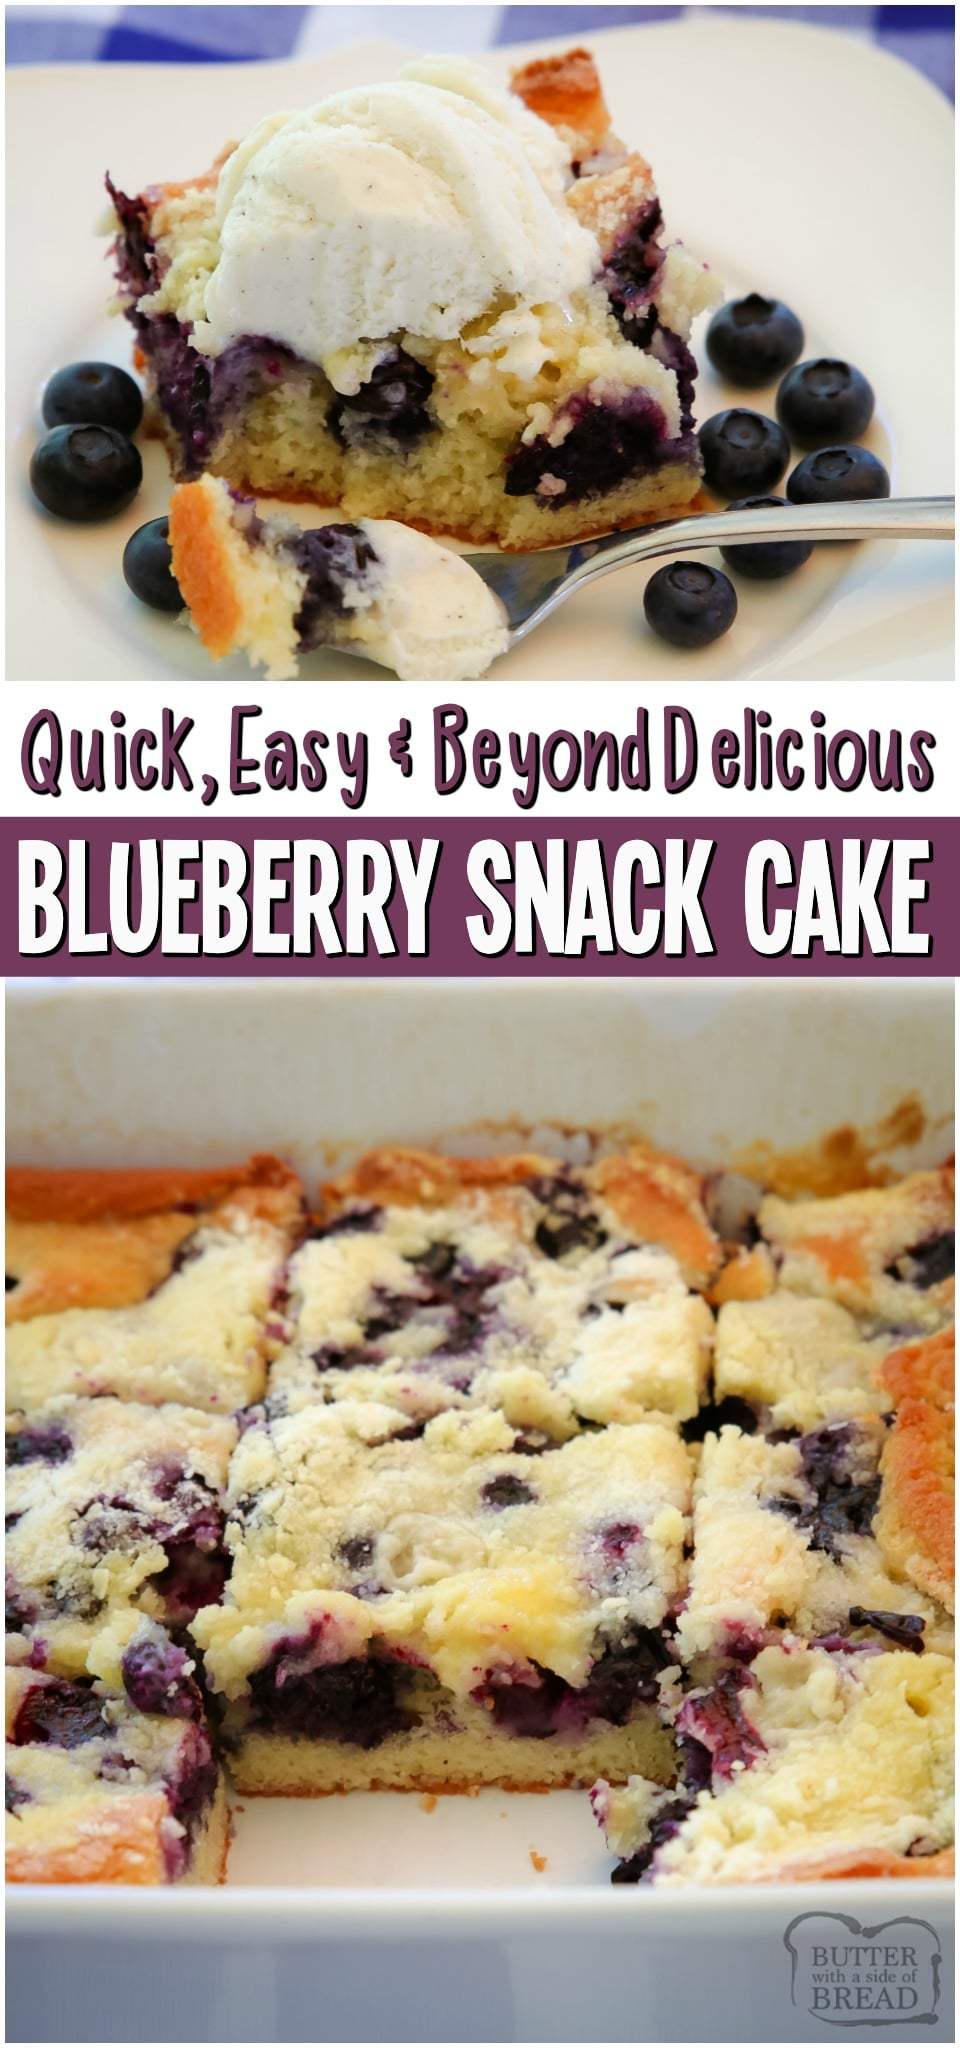 Easy Blueberry Cake recipe made with butter, sugar, flour, egg whites and blueberries of course! Simple snack cake topped with a buttery topping and baked with fresh blueberries. #blueberry #cake #butter #easyrecipe #dessert #baking #snackcake #blueberries #recipe from BUTTER WITH A SIDE OF BREAD